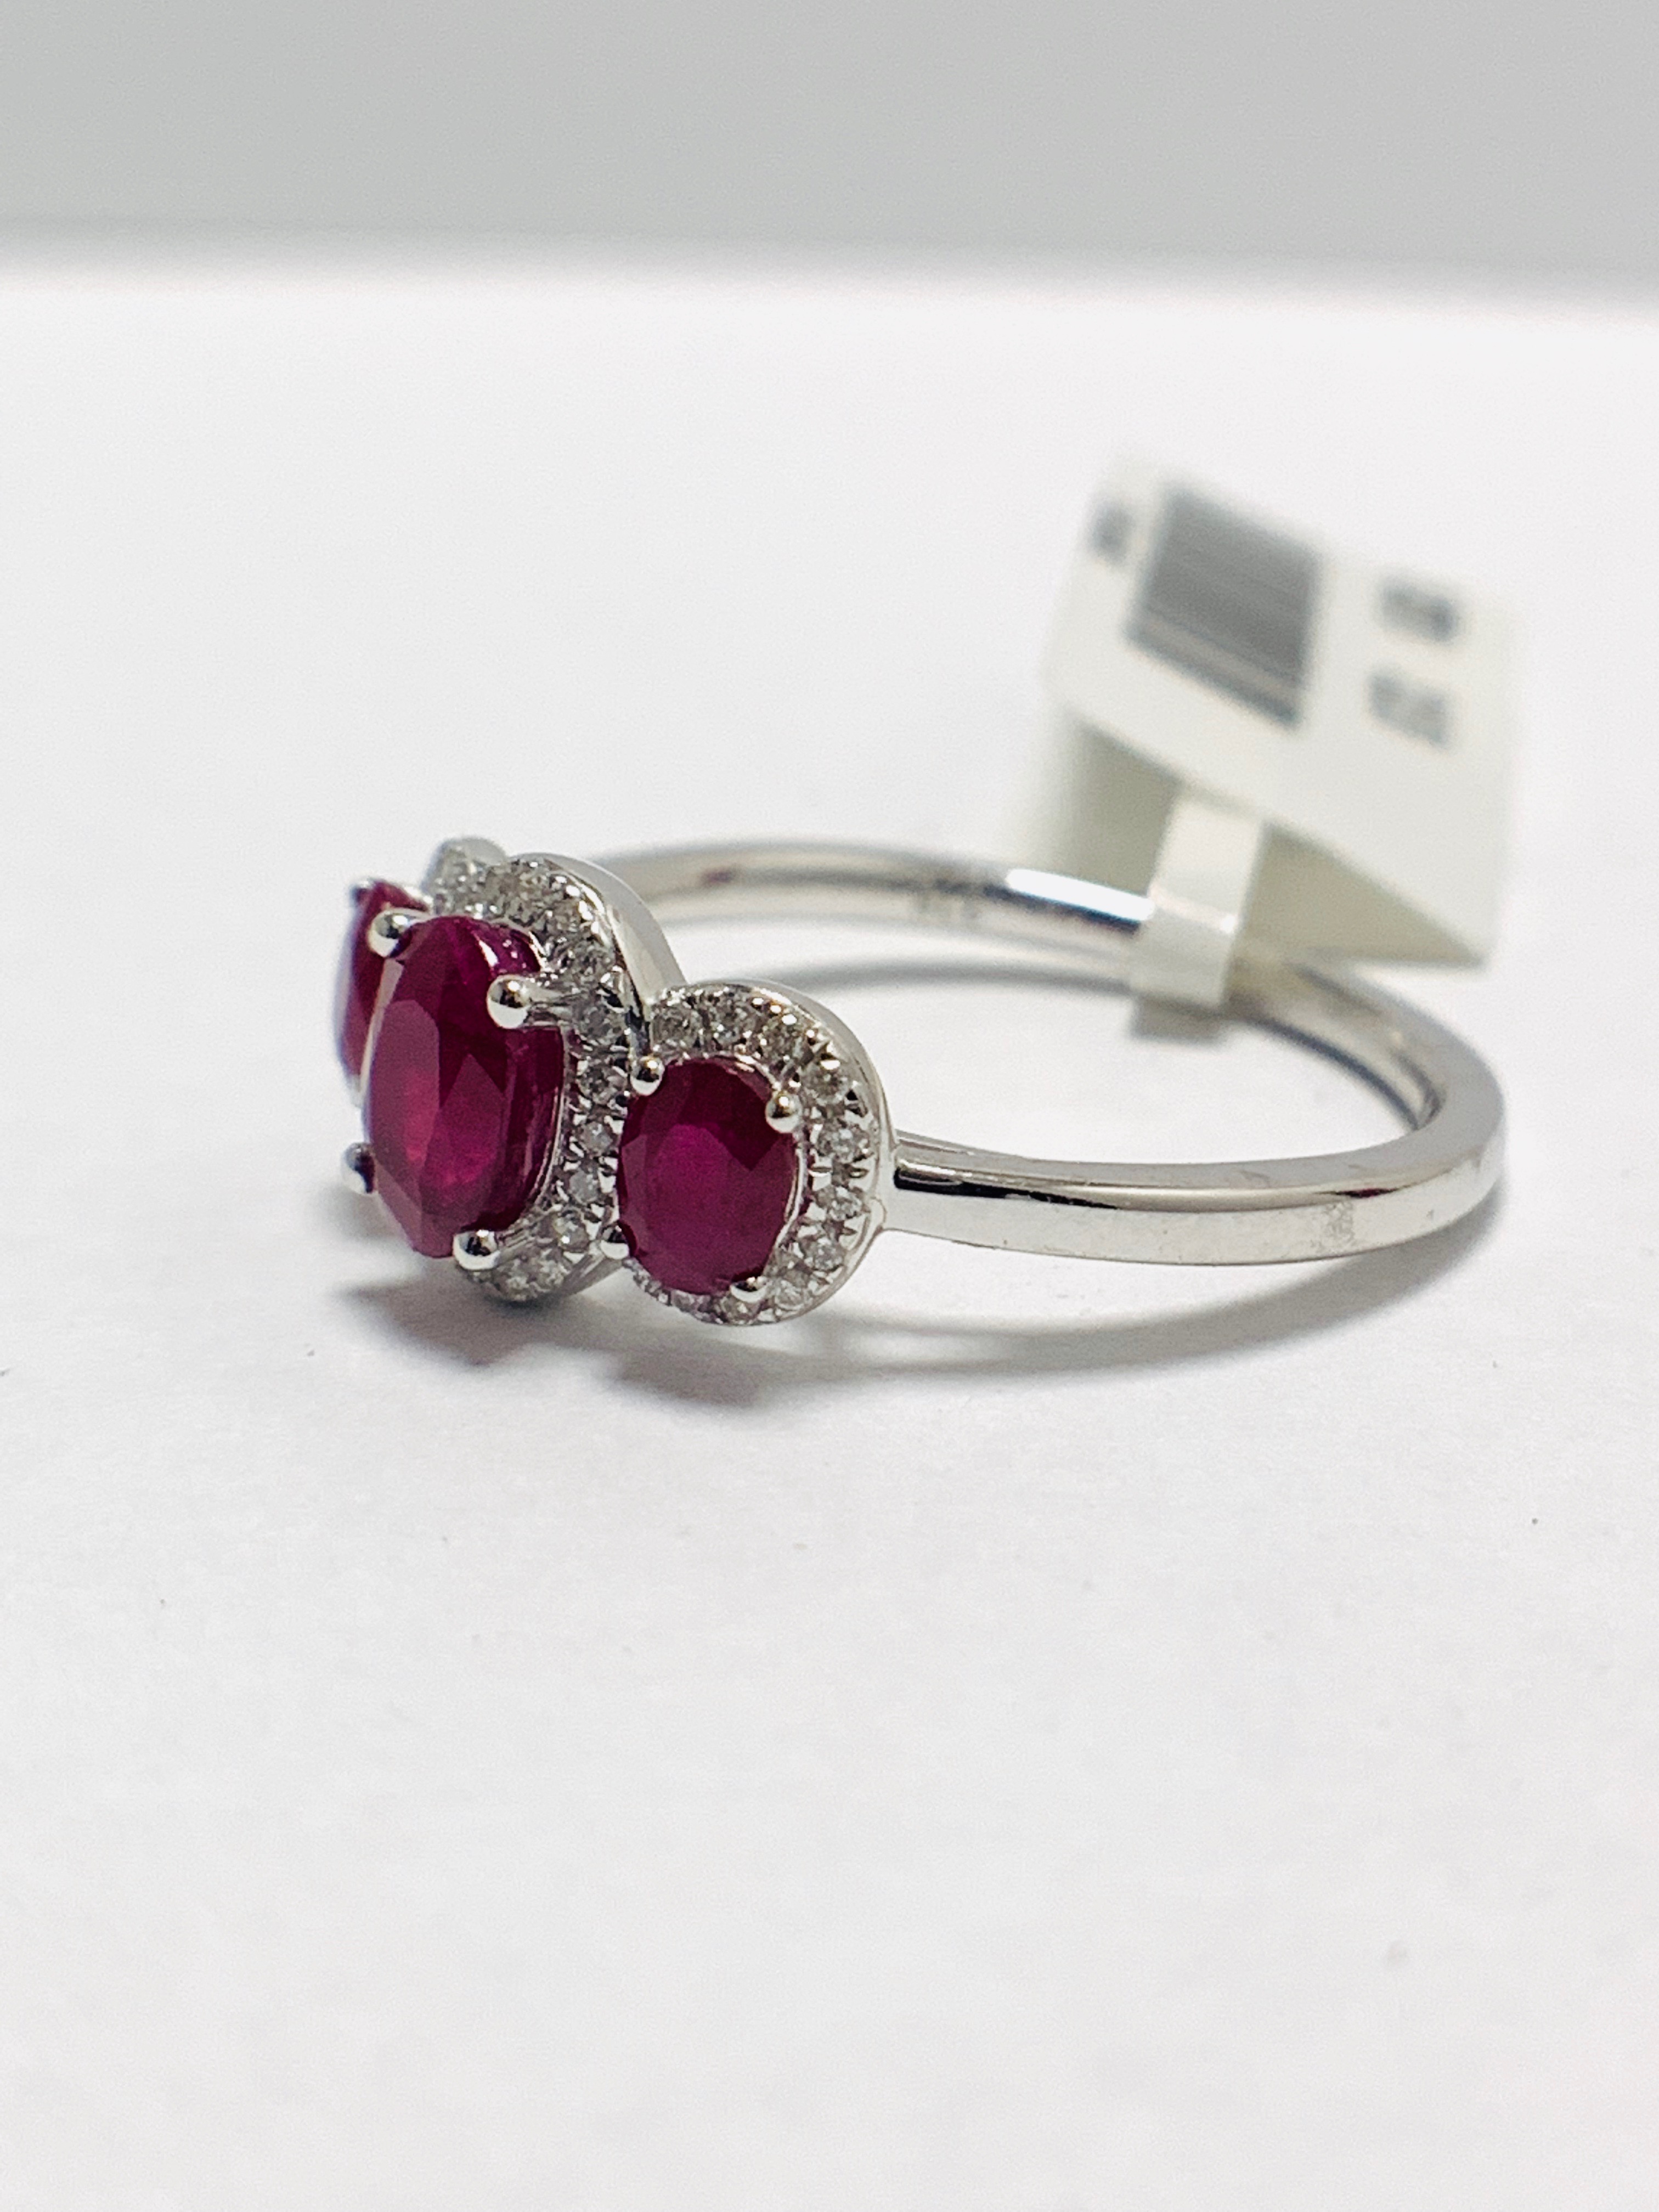 9ct white Gold Ruby trilogy style ring - Image 2 of 8